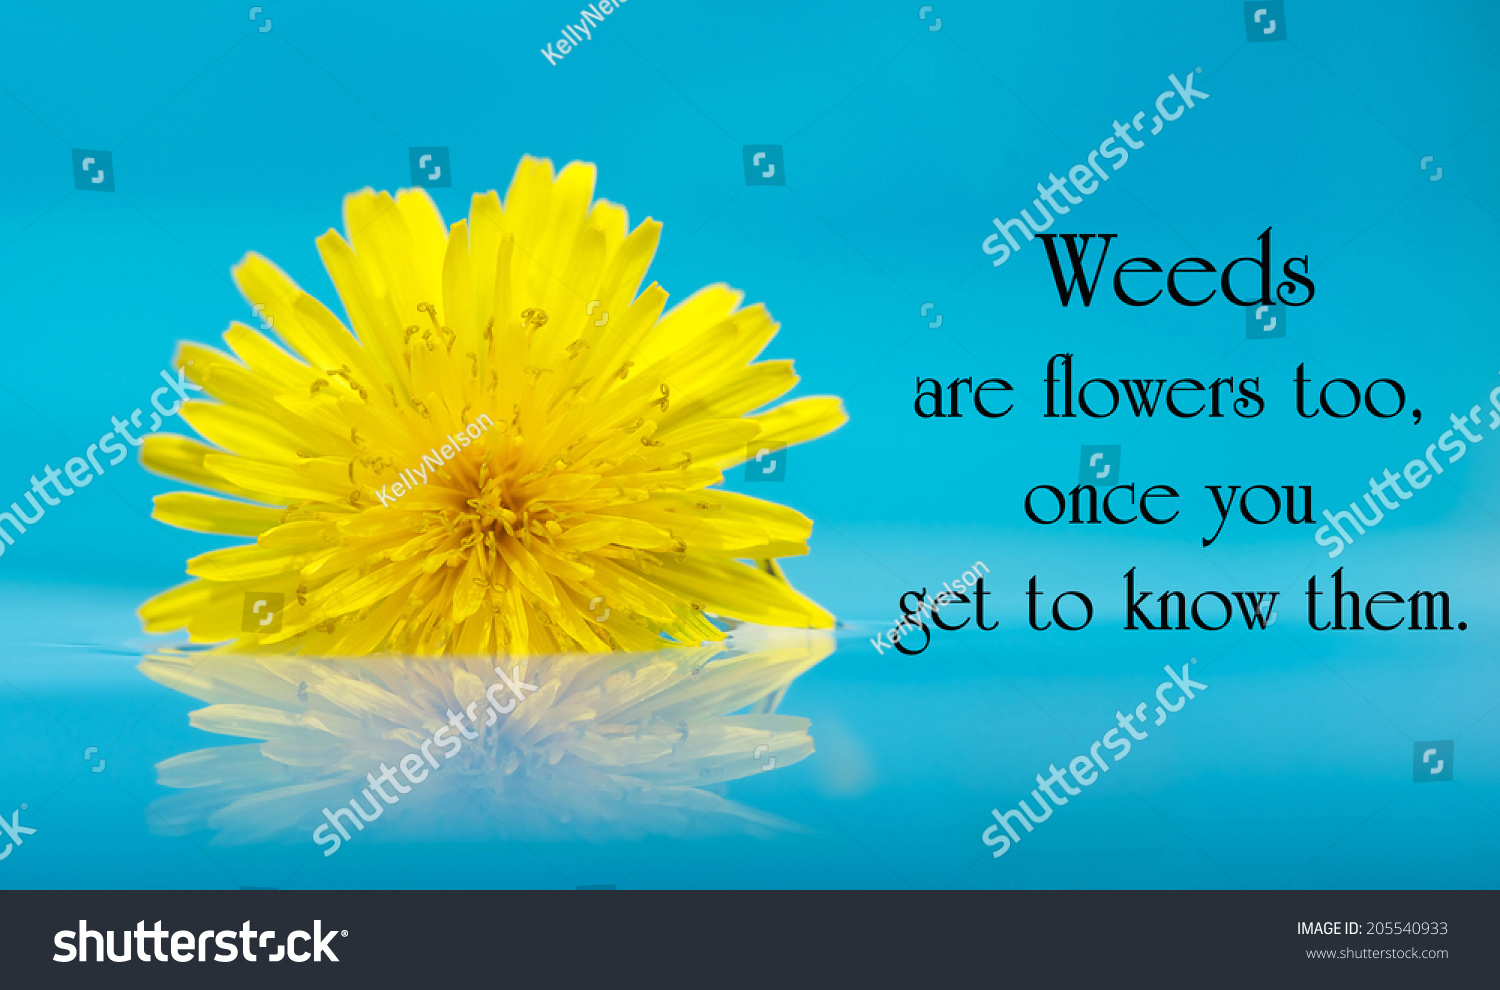 Inspirational quote on life by A A Milne with a beautiful yellow dandelion bloom floating on water